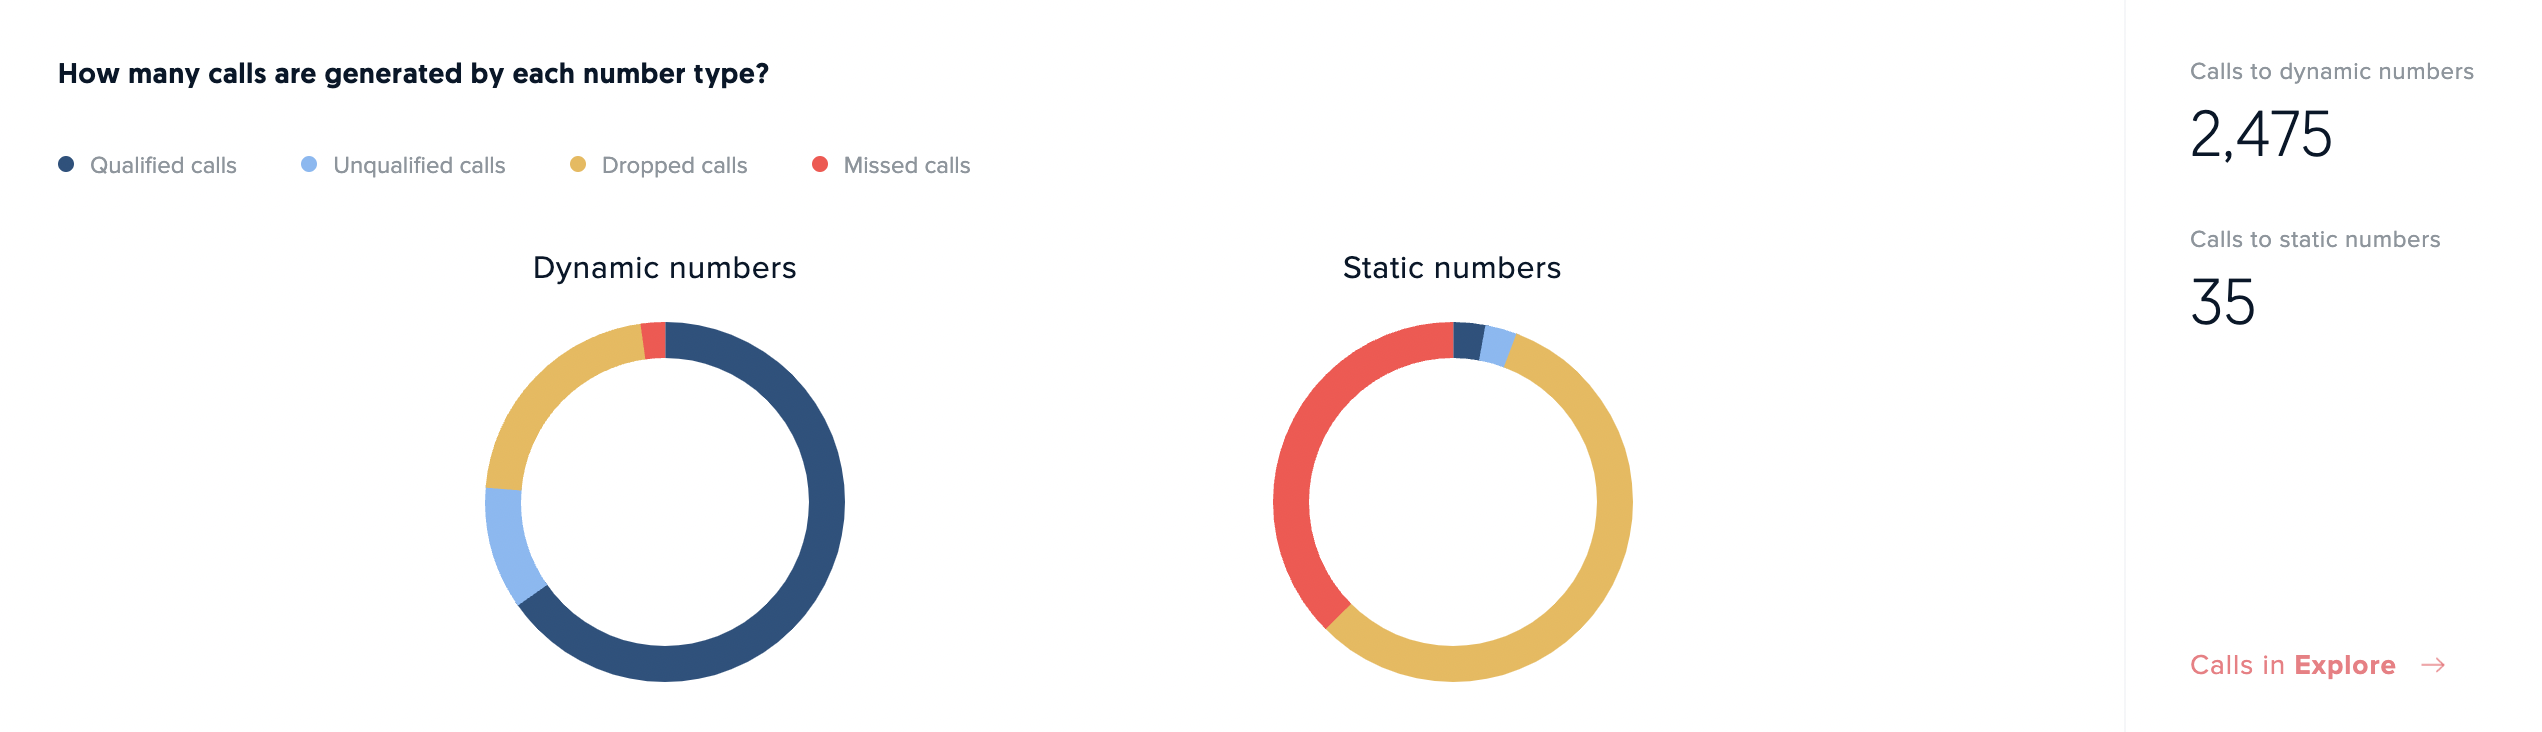 Monitor-How_many_calls_are_generated_by_each_number_type.png